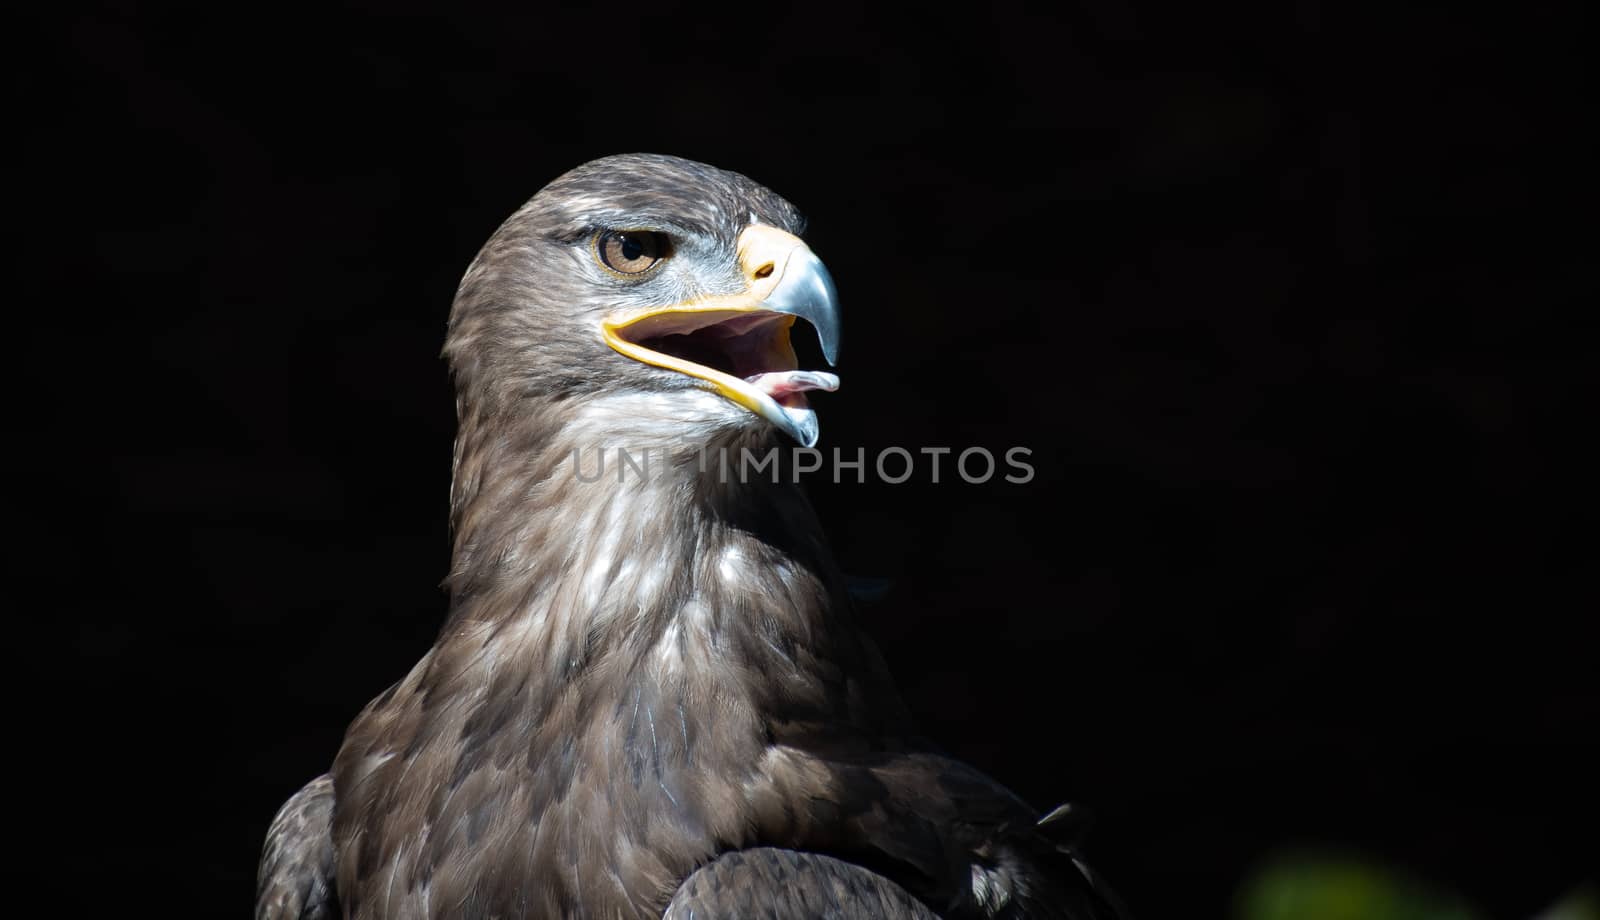 Head and shot of a Tawny Eagle on black background